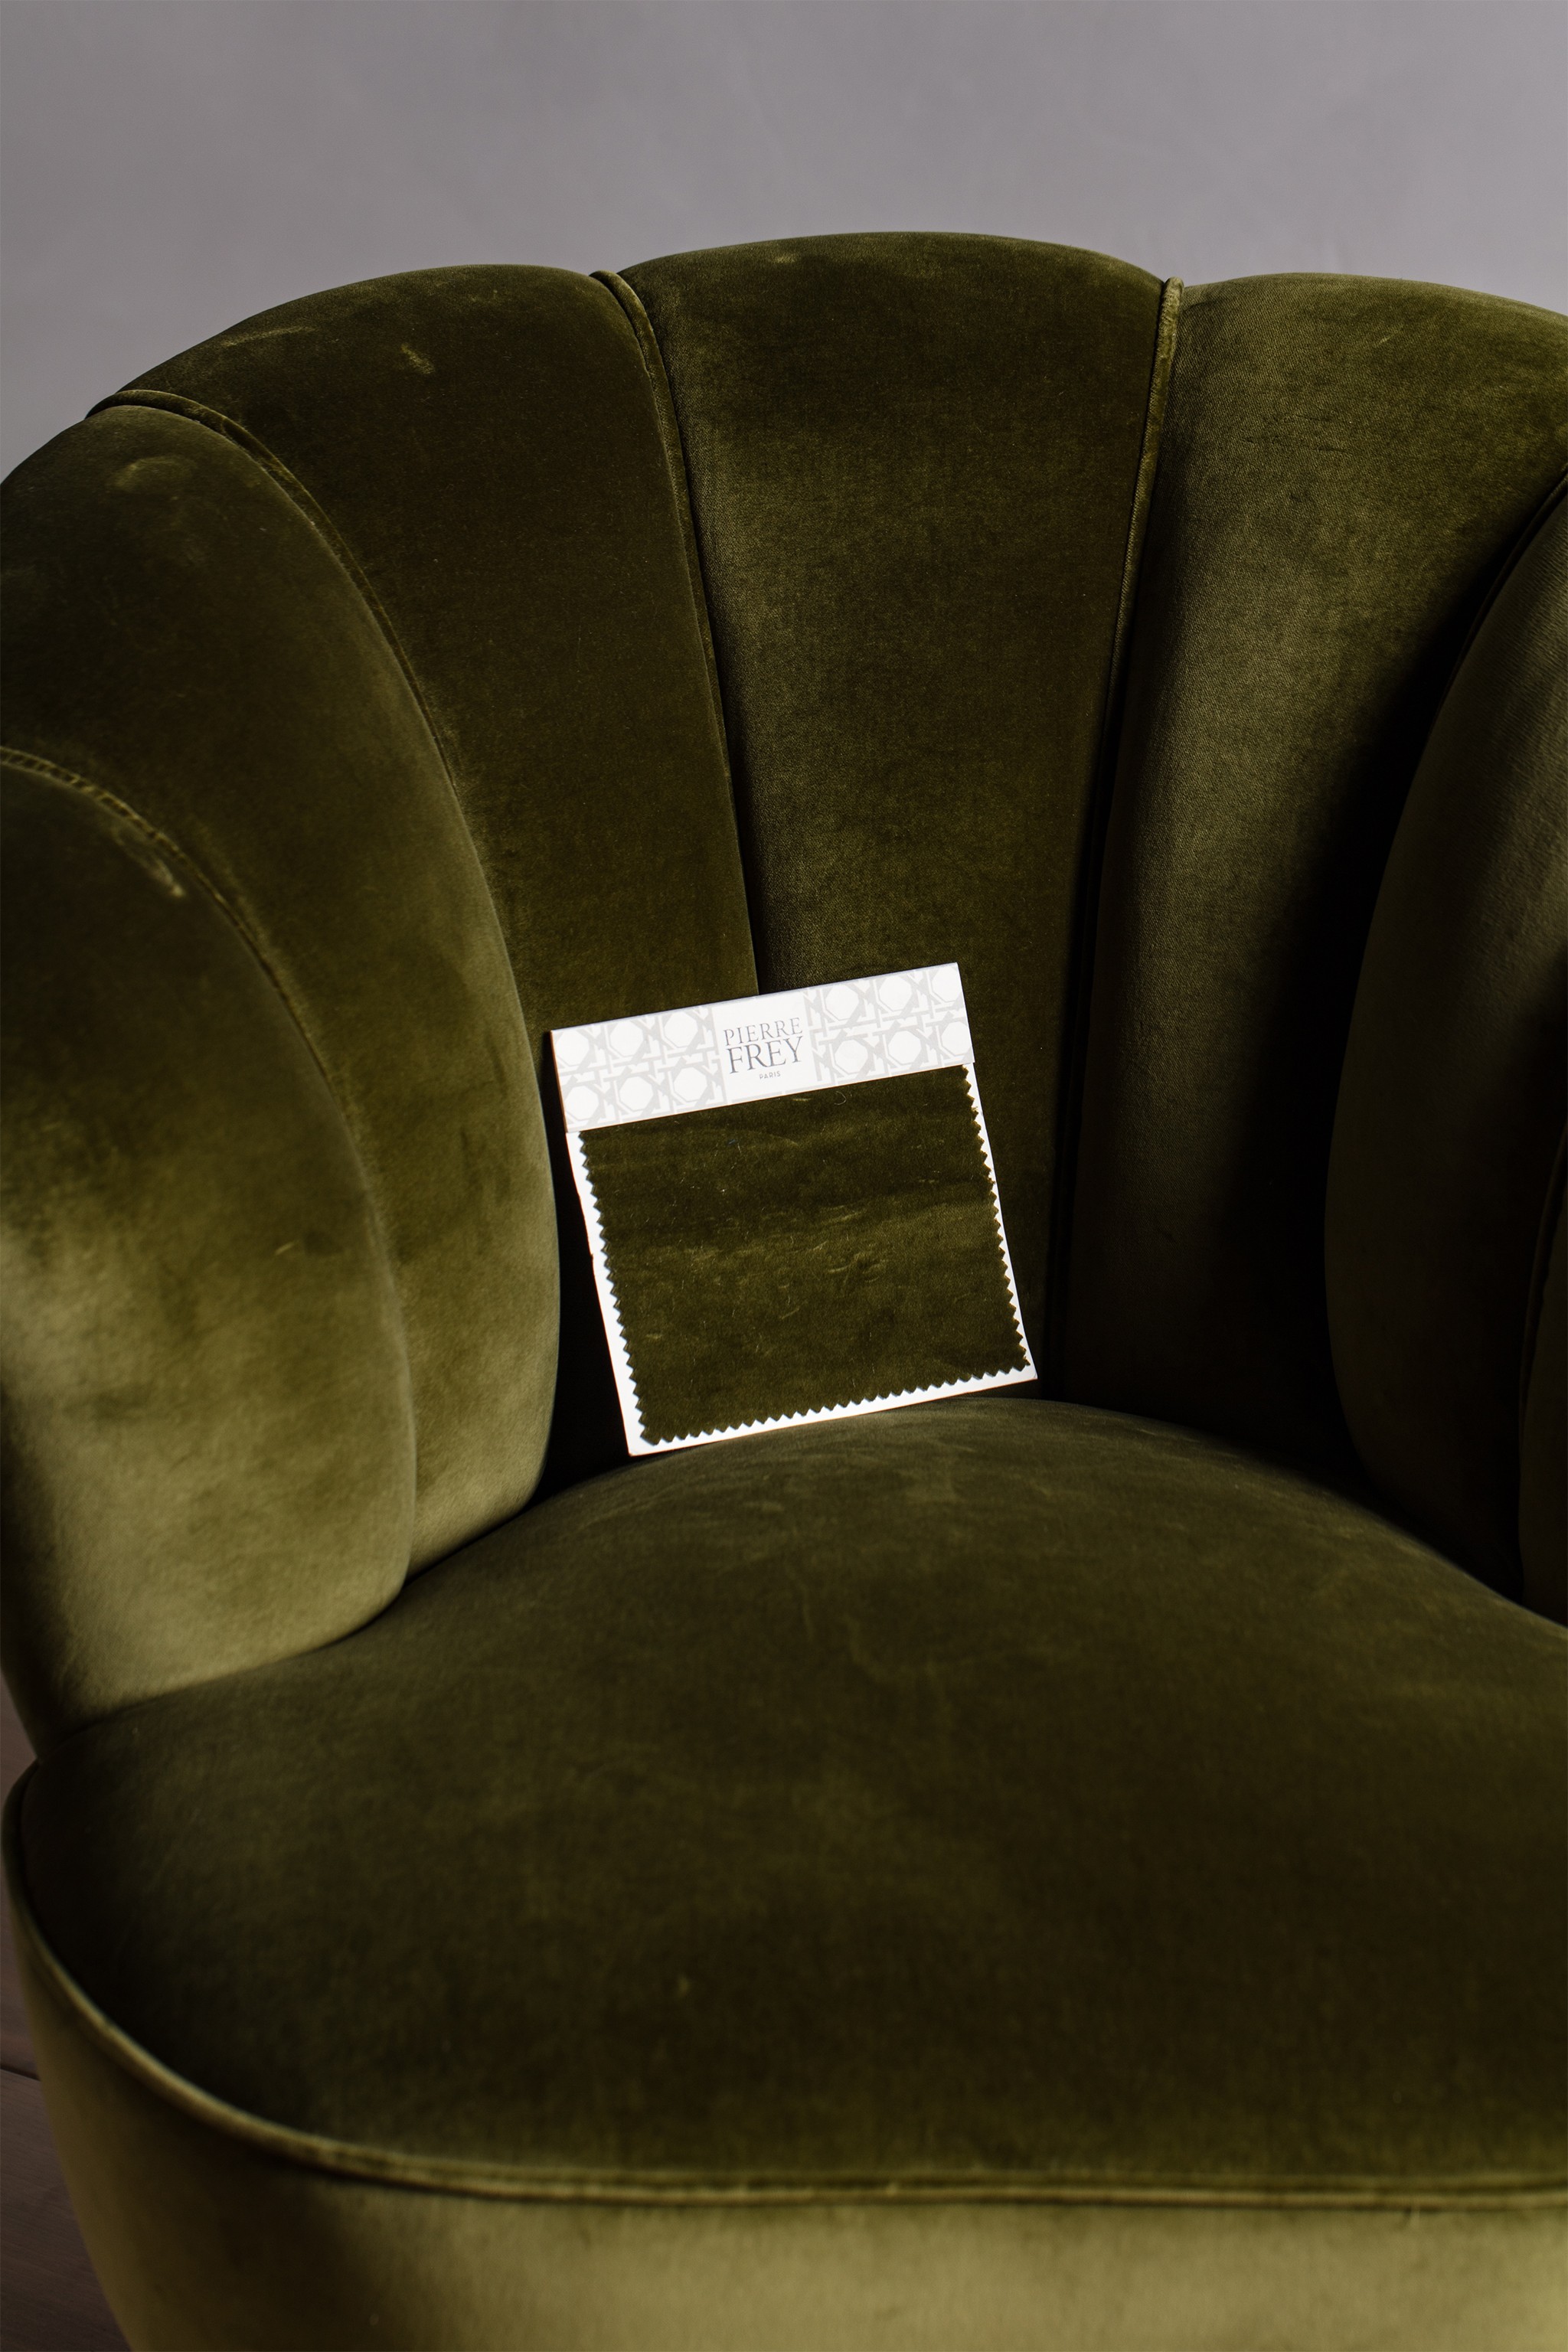 a close up of a green chair with a tag on it